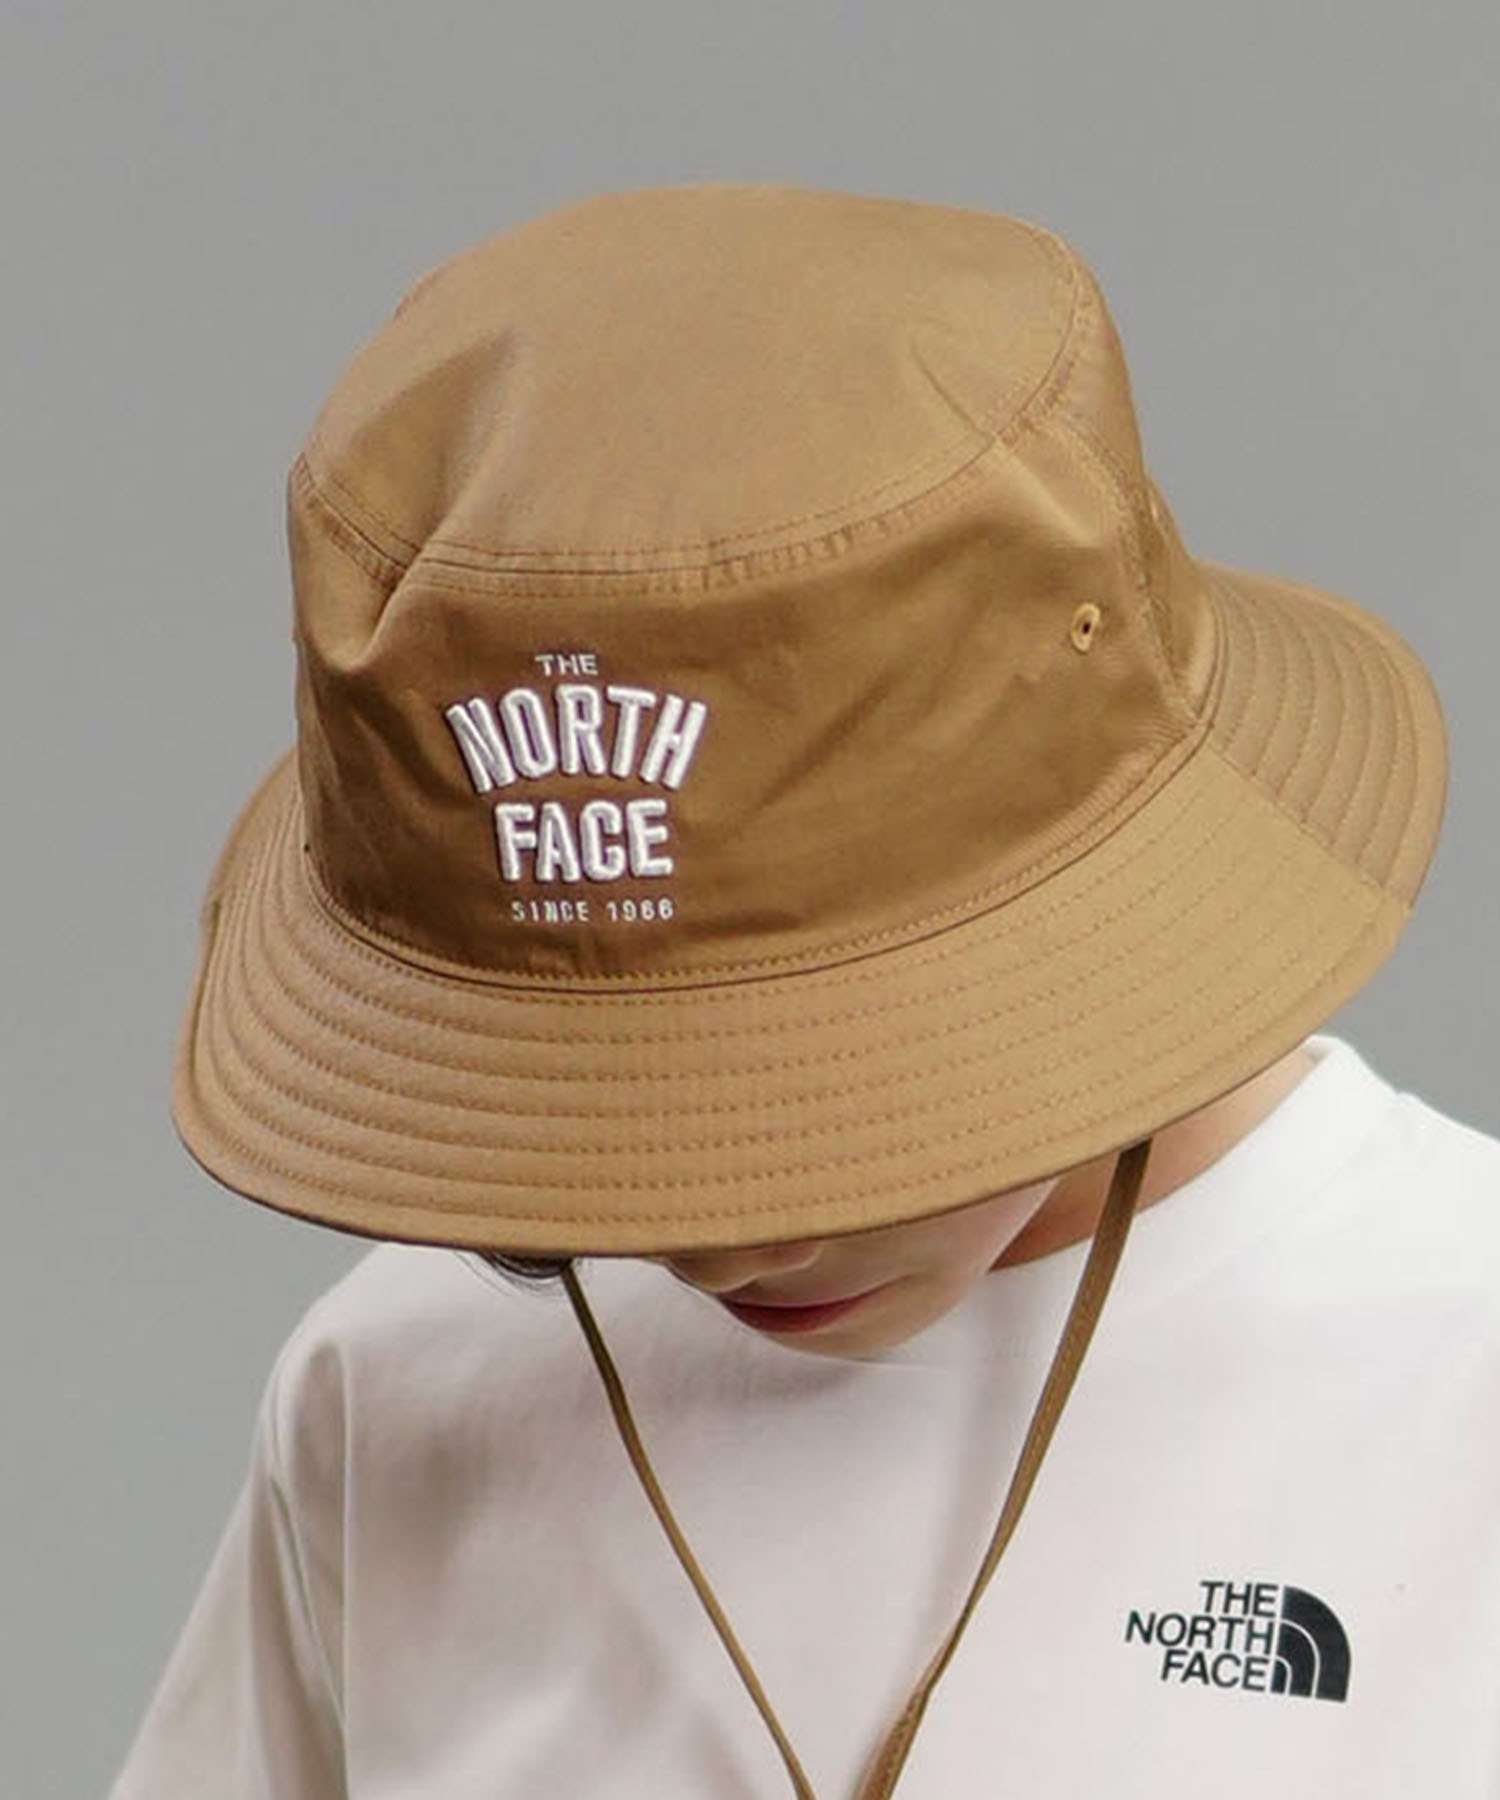 THE NORTH FACE ザ・ノース・フェイス MESSAGE HAT メッセージハット キッズ バケットハット NNJ02408(KT-S)